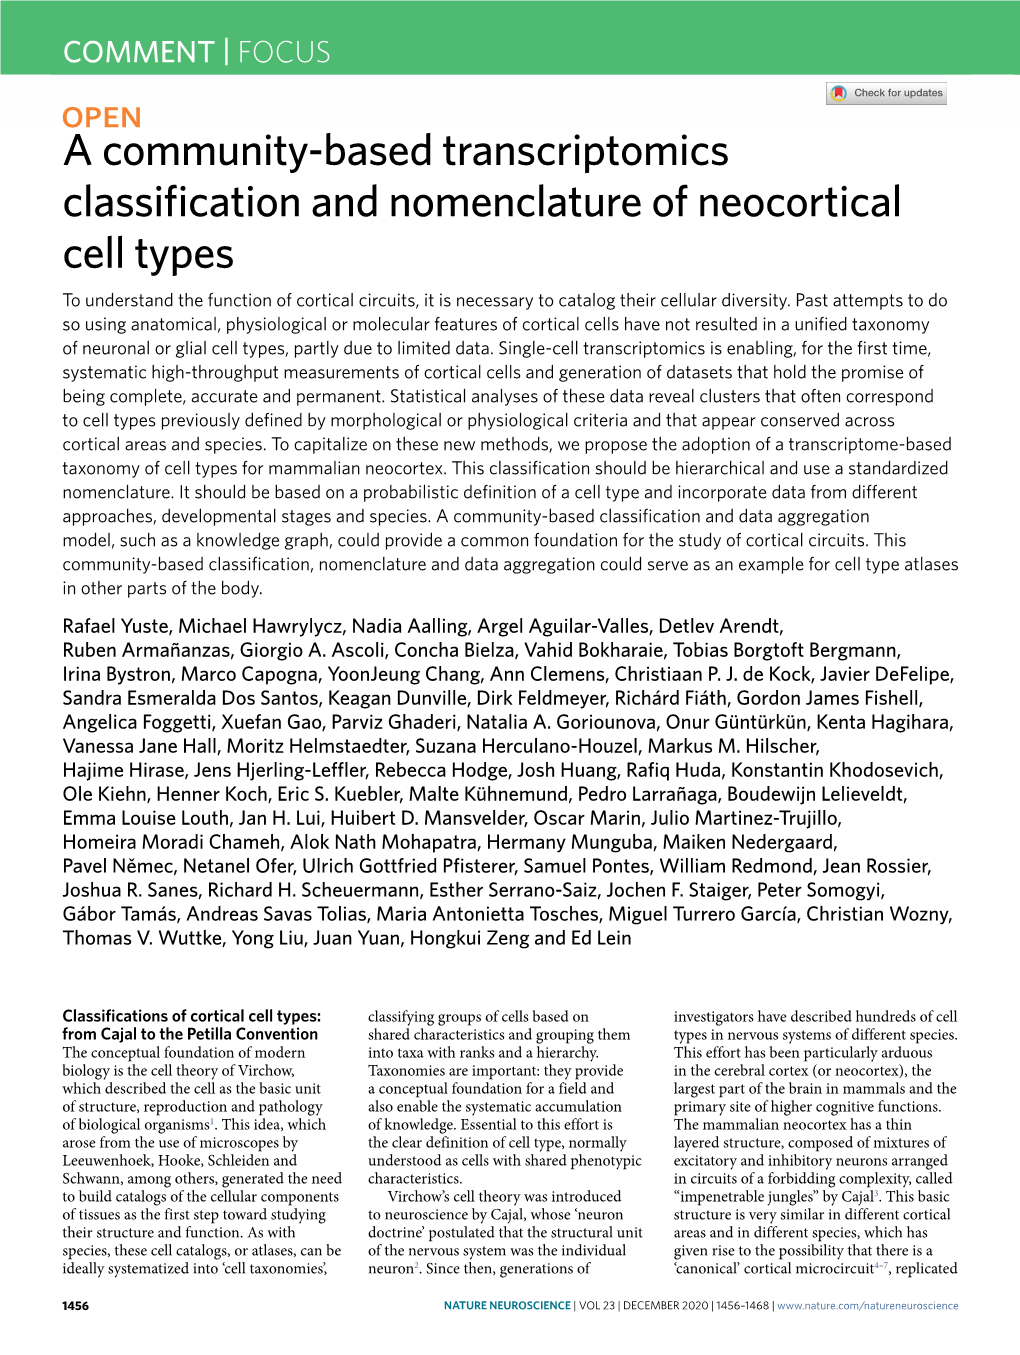 A Community-Based Transcriptomics Classification and Nomenclature of Neocortical Cell Types